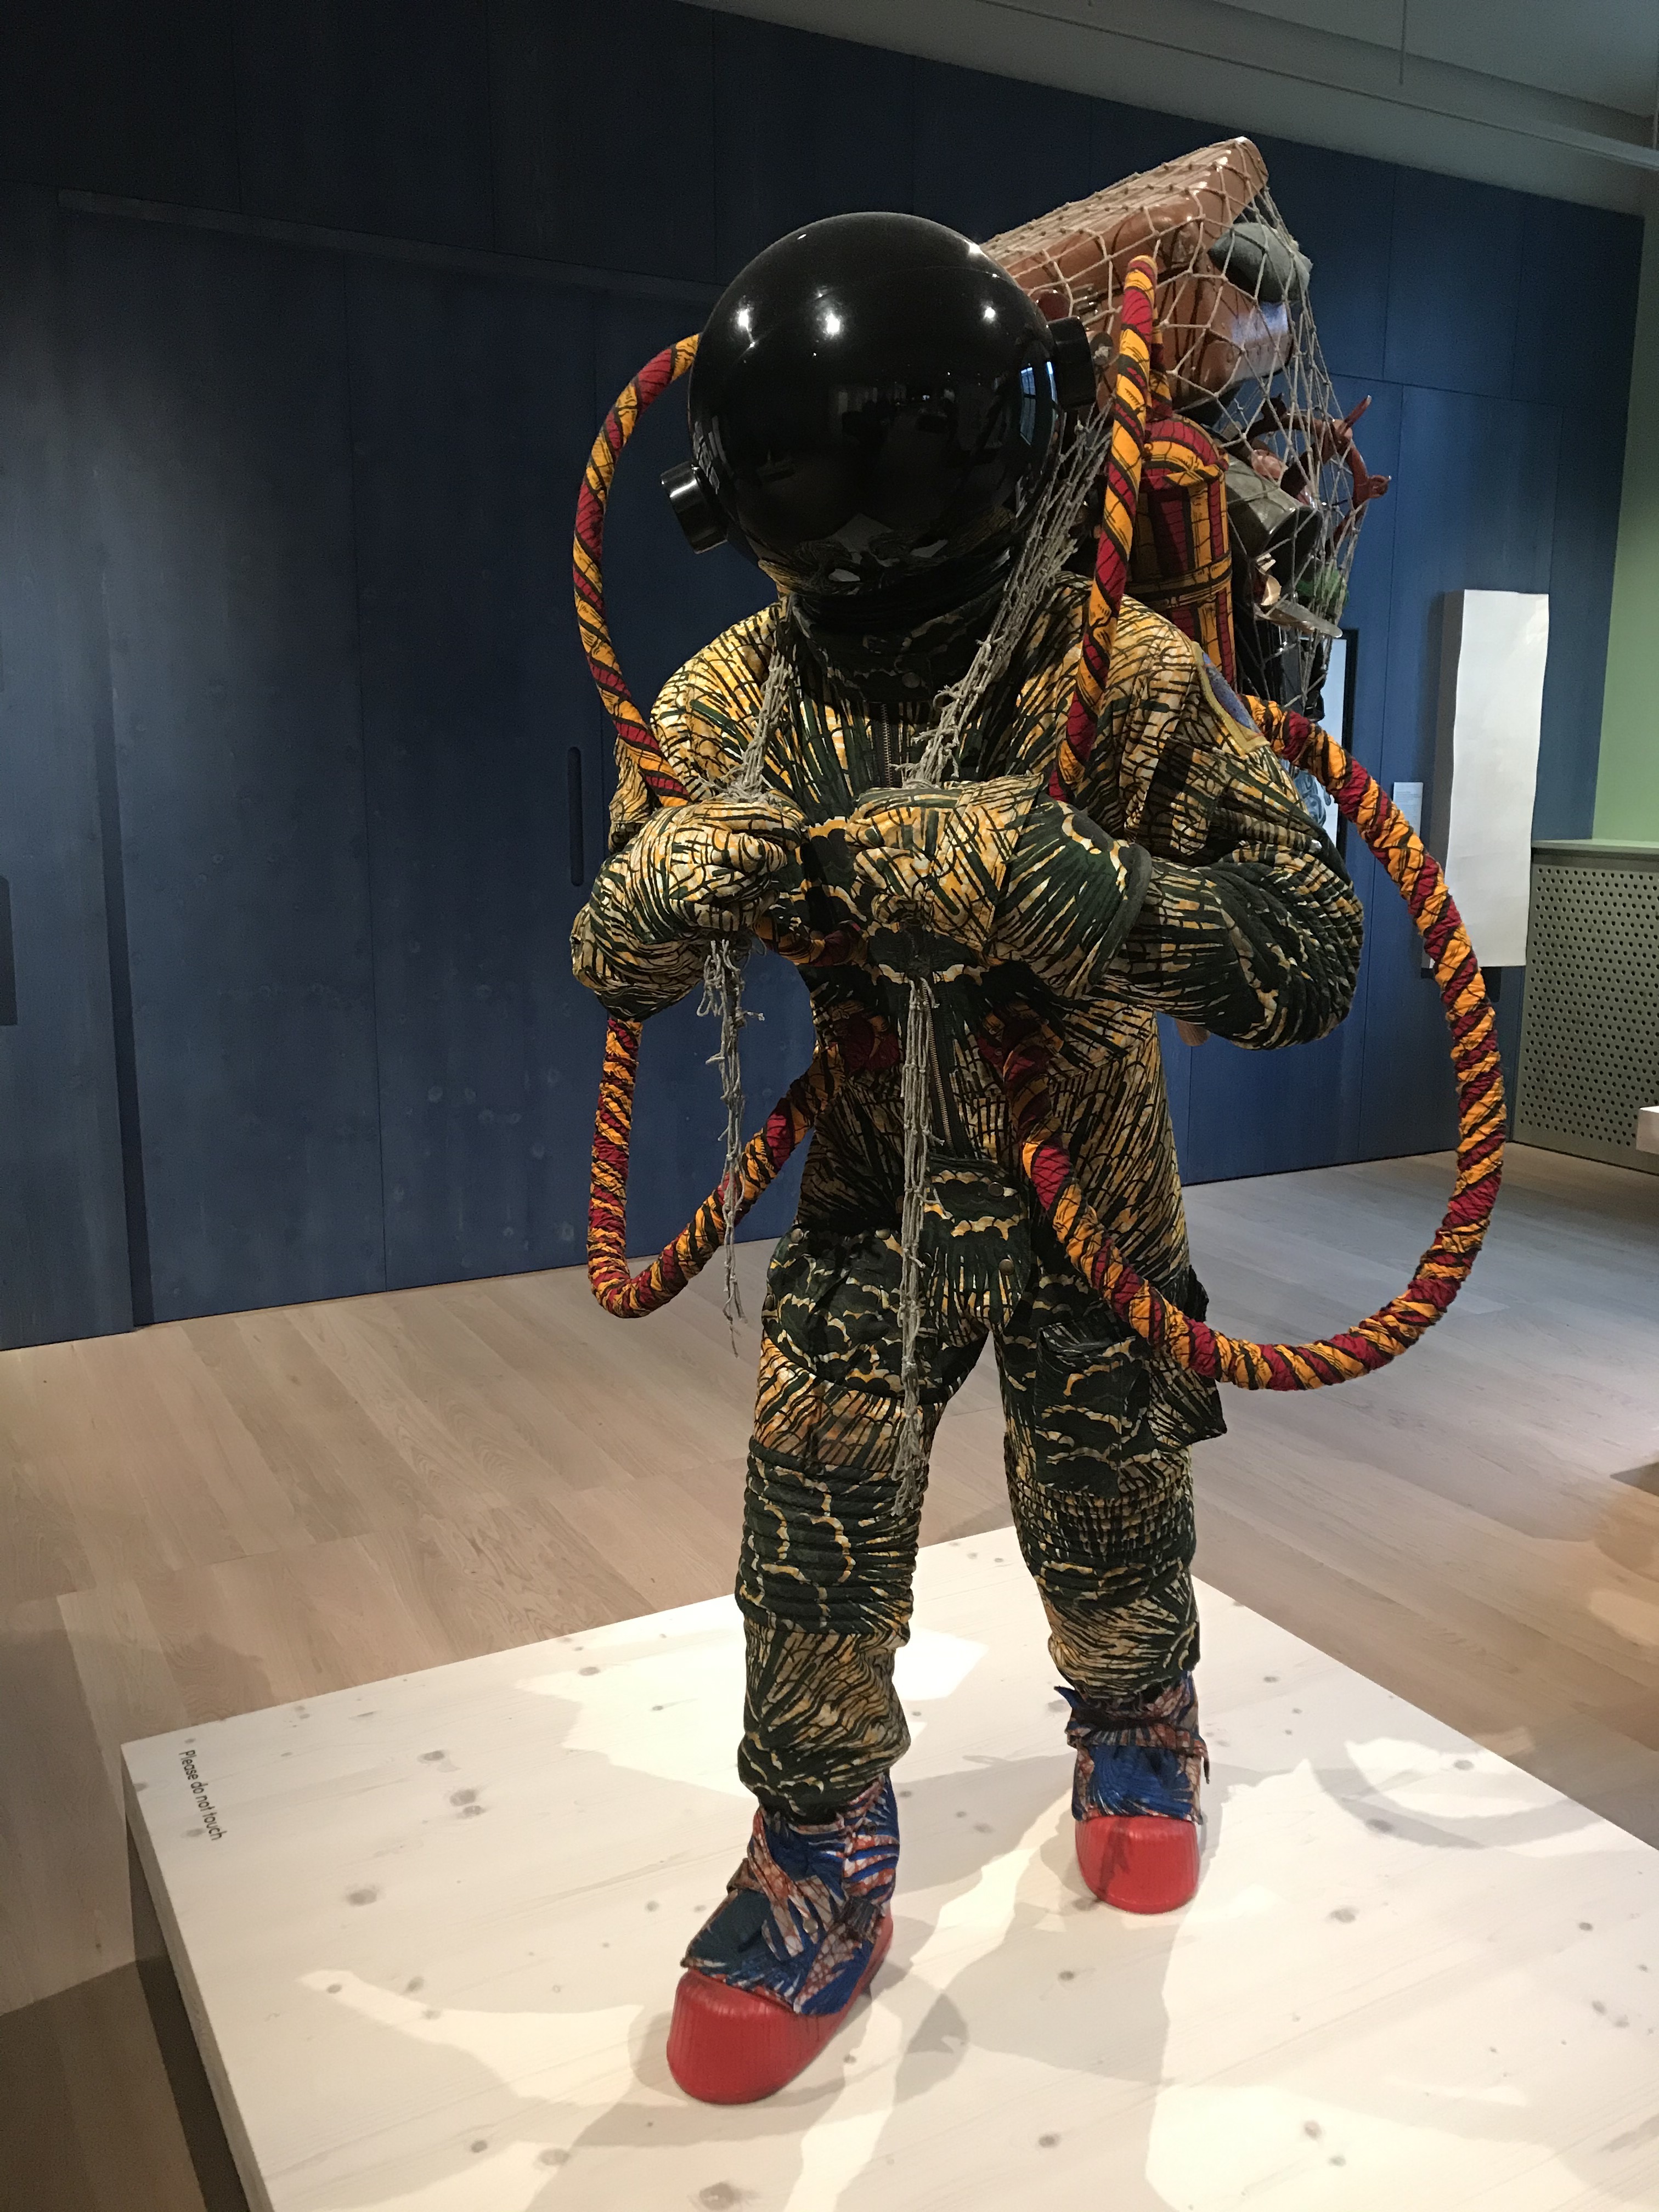 Refugee astronaut by Yinka Shonibare at the Wellcome Collection's exhibition